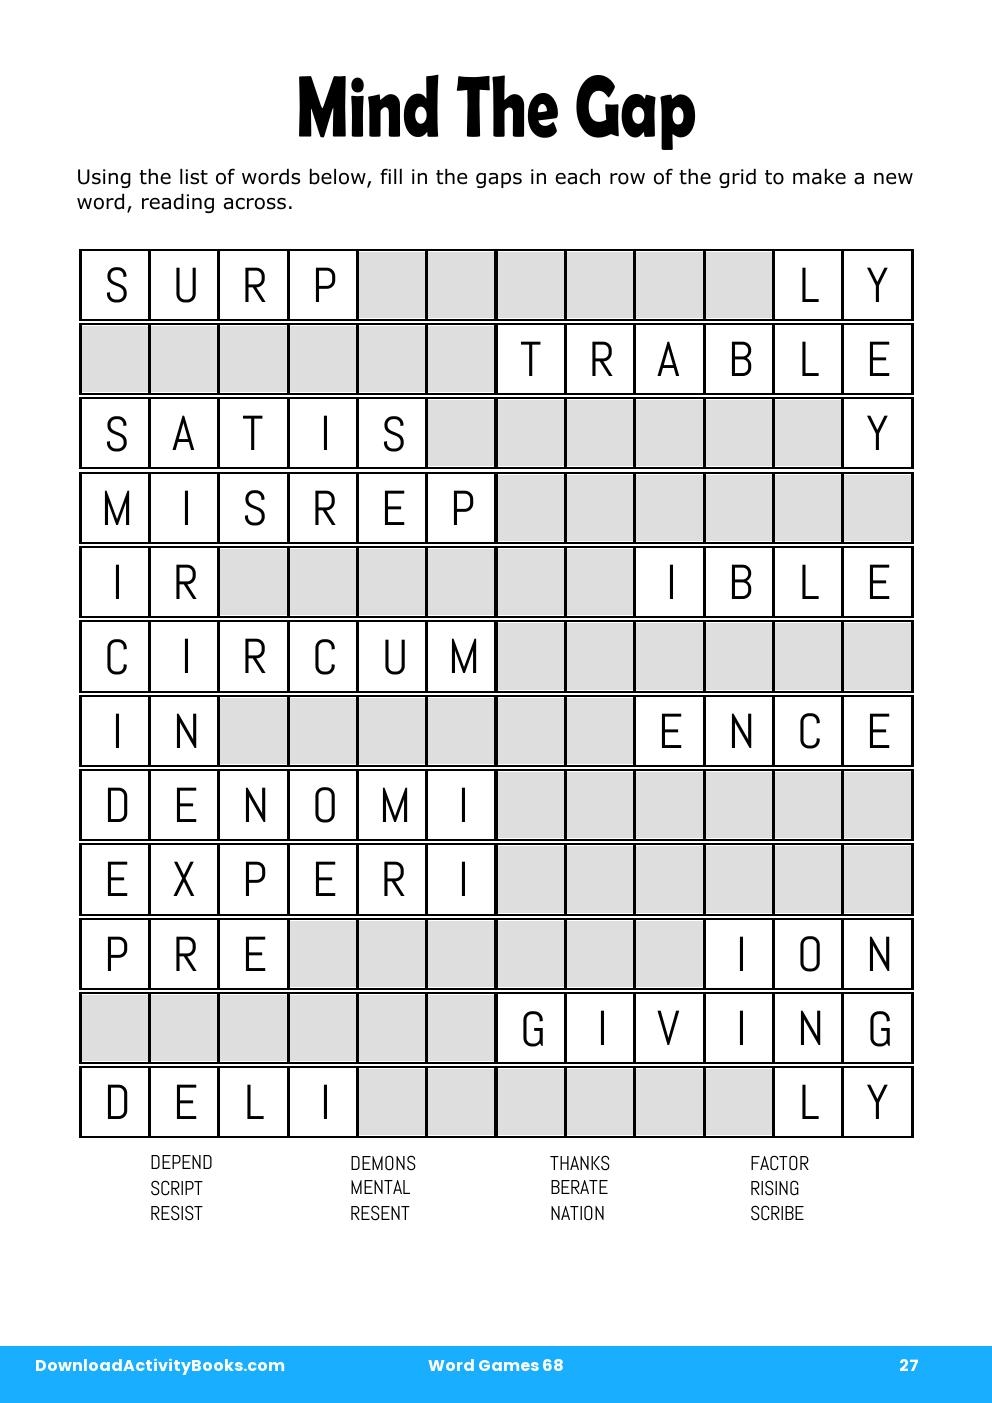 Mind The Gap in Word Games 68